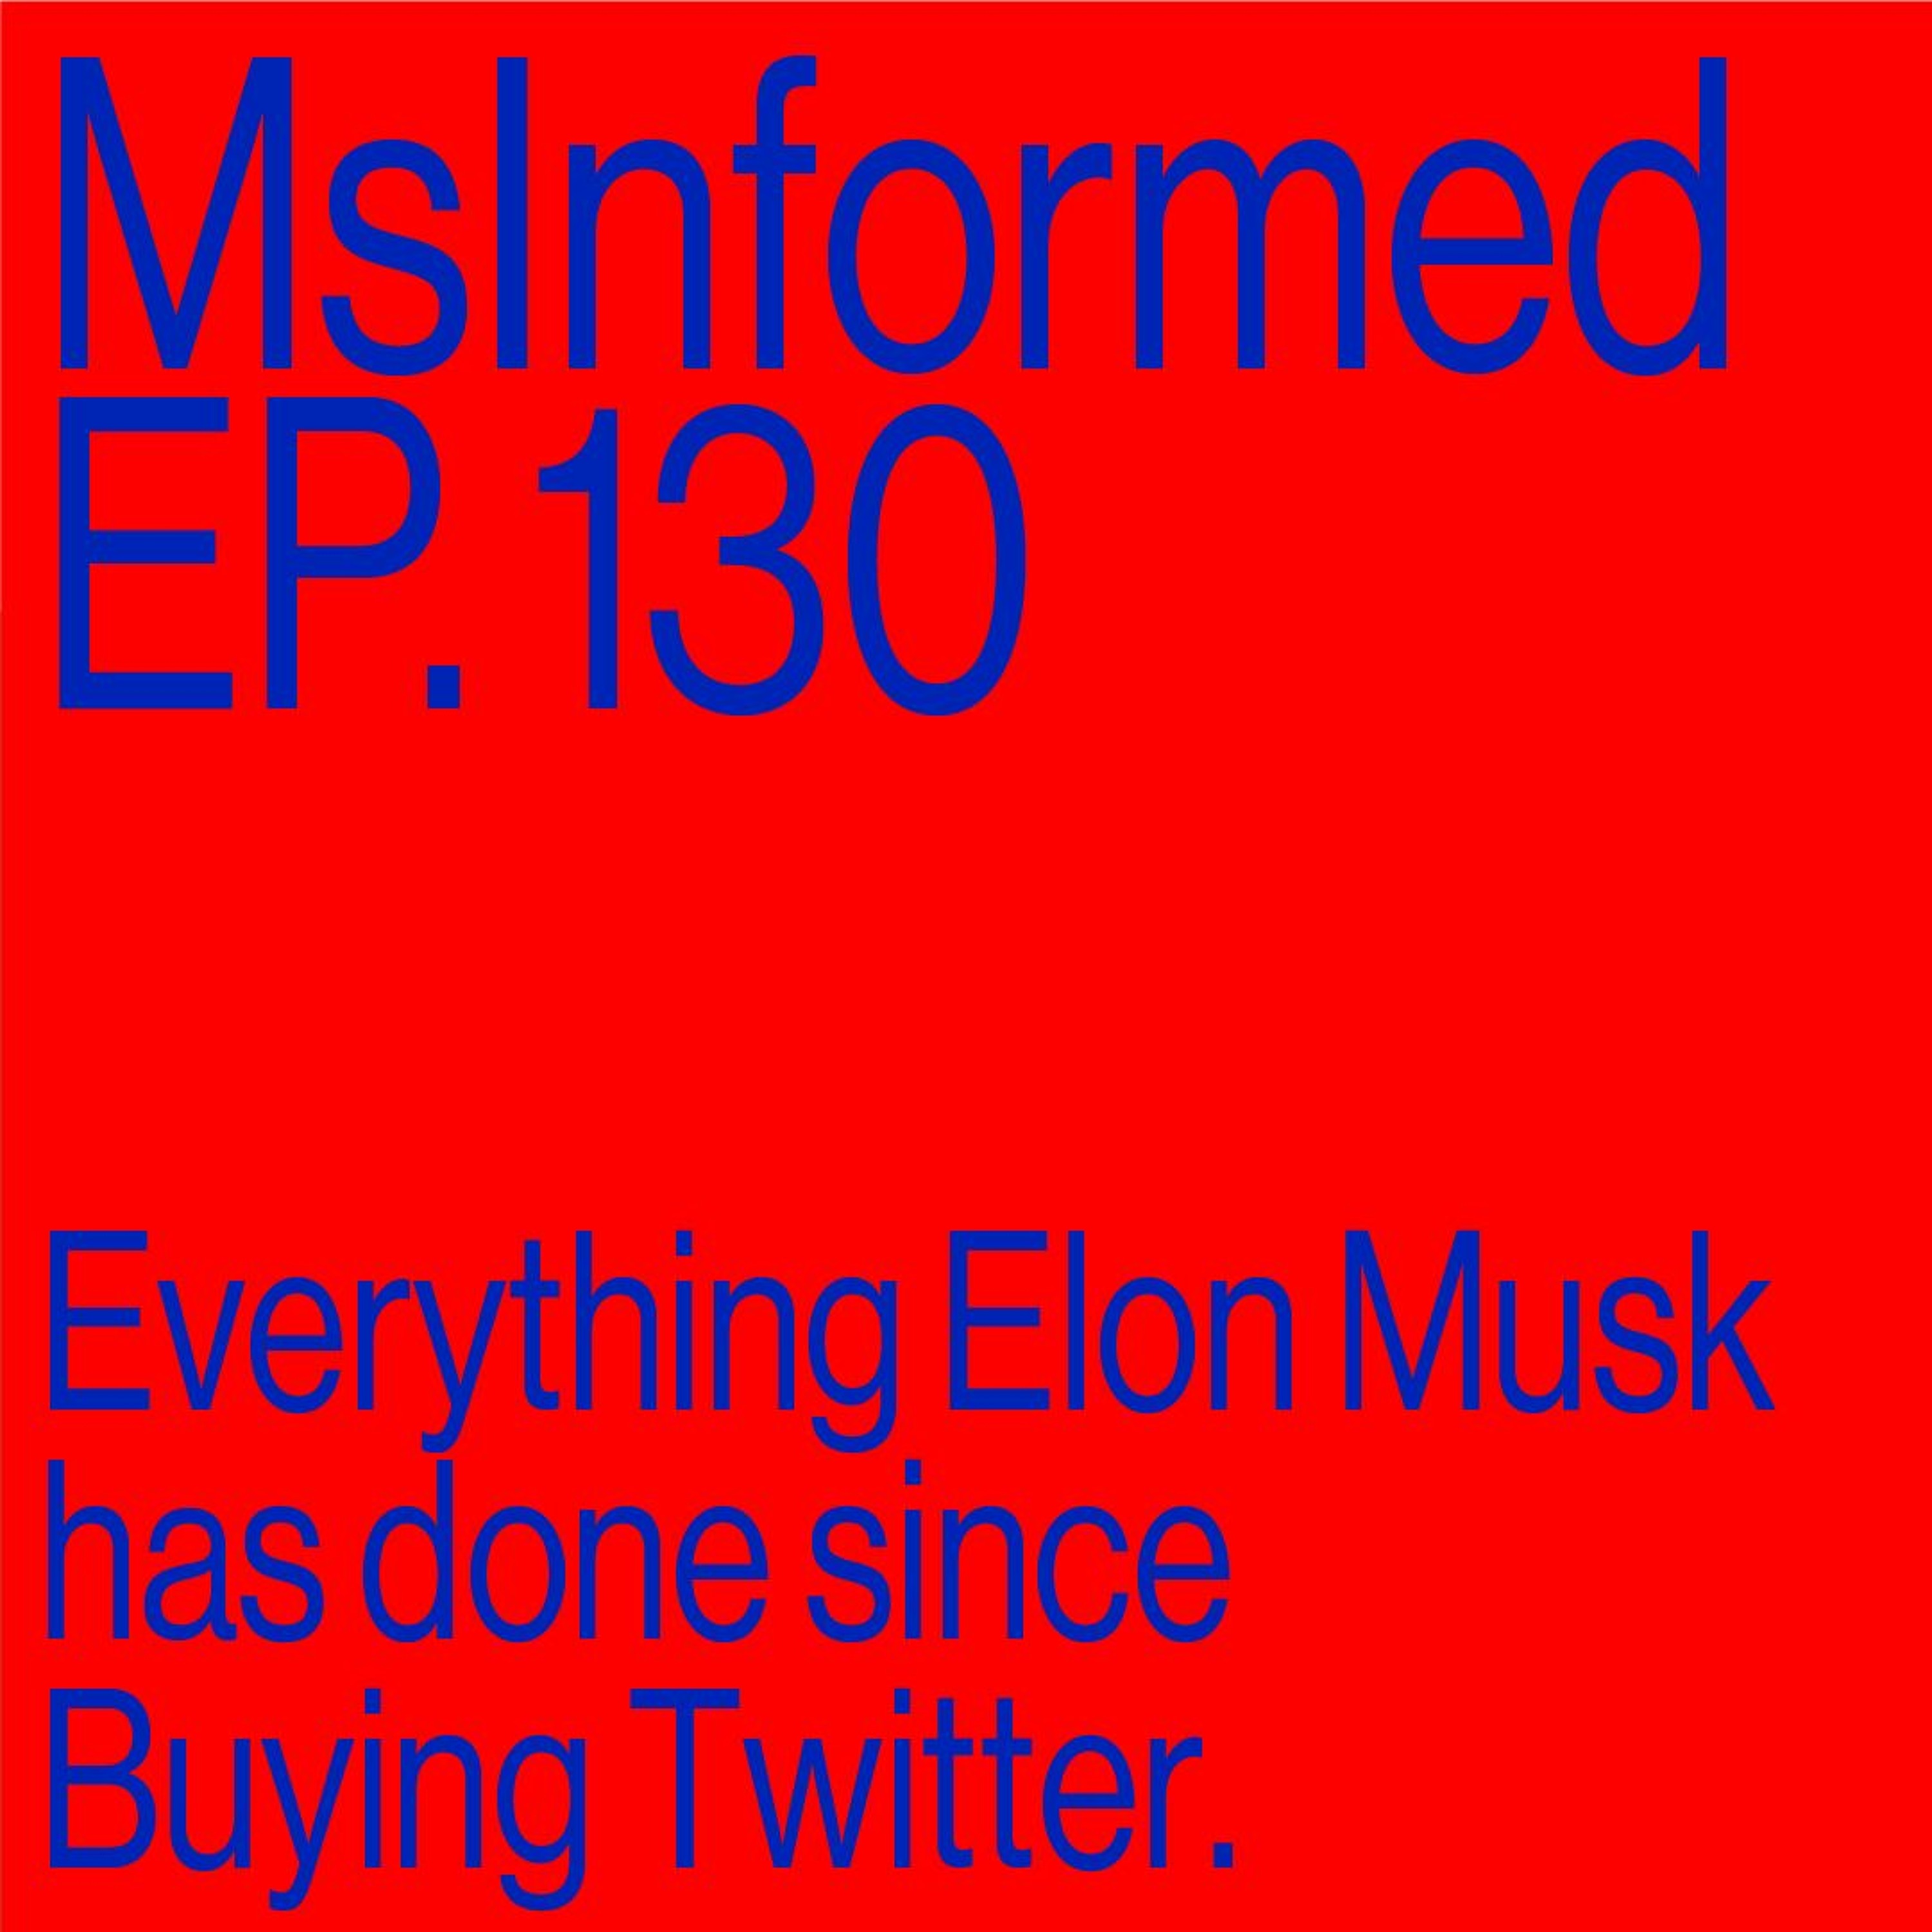 Episode 130: Everything Elon Musk Has Done Since Buying Twitter